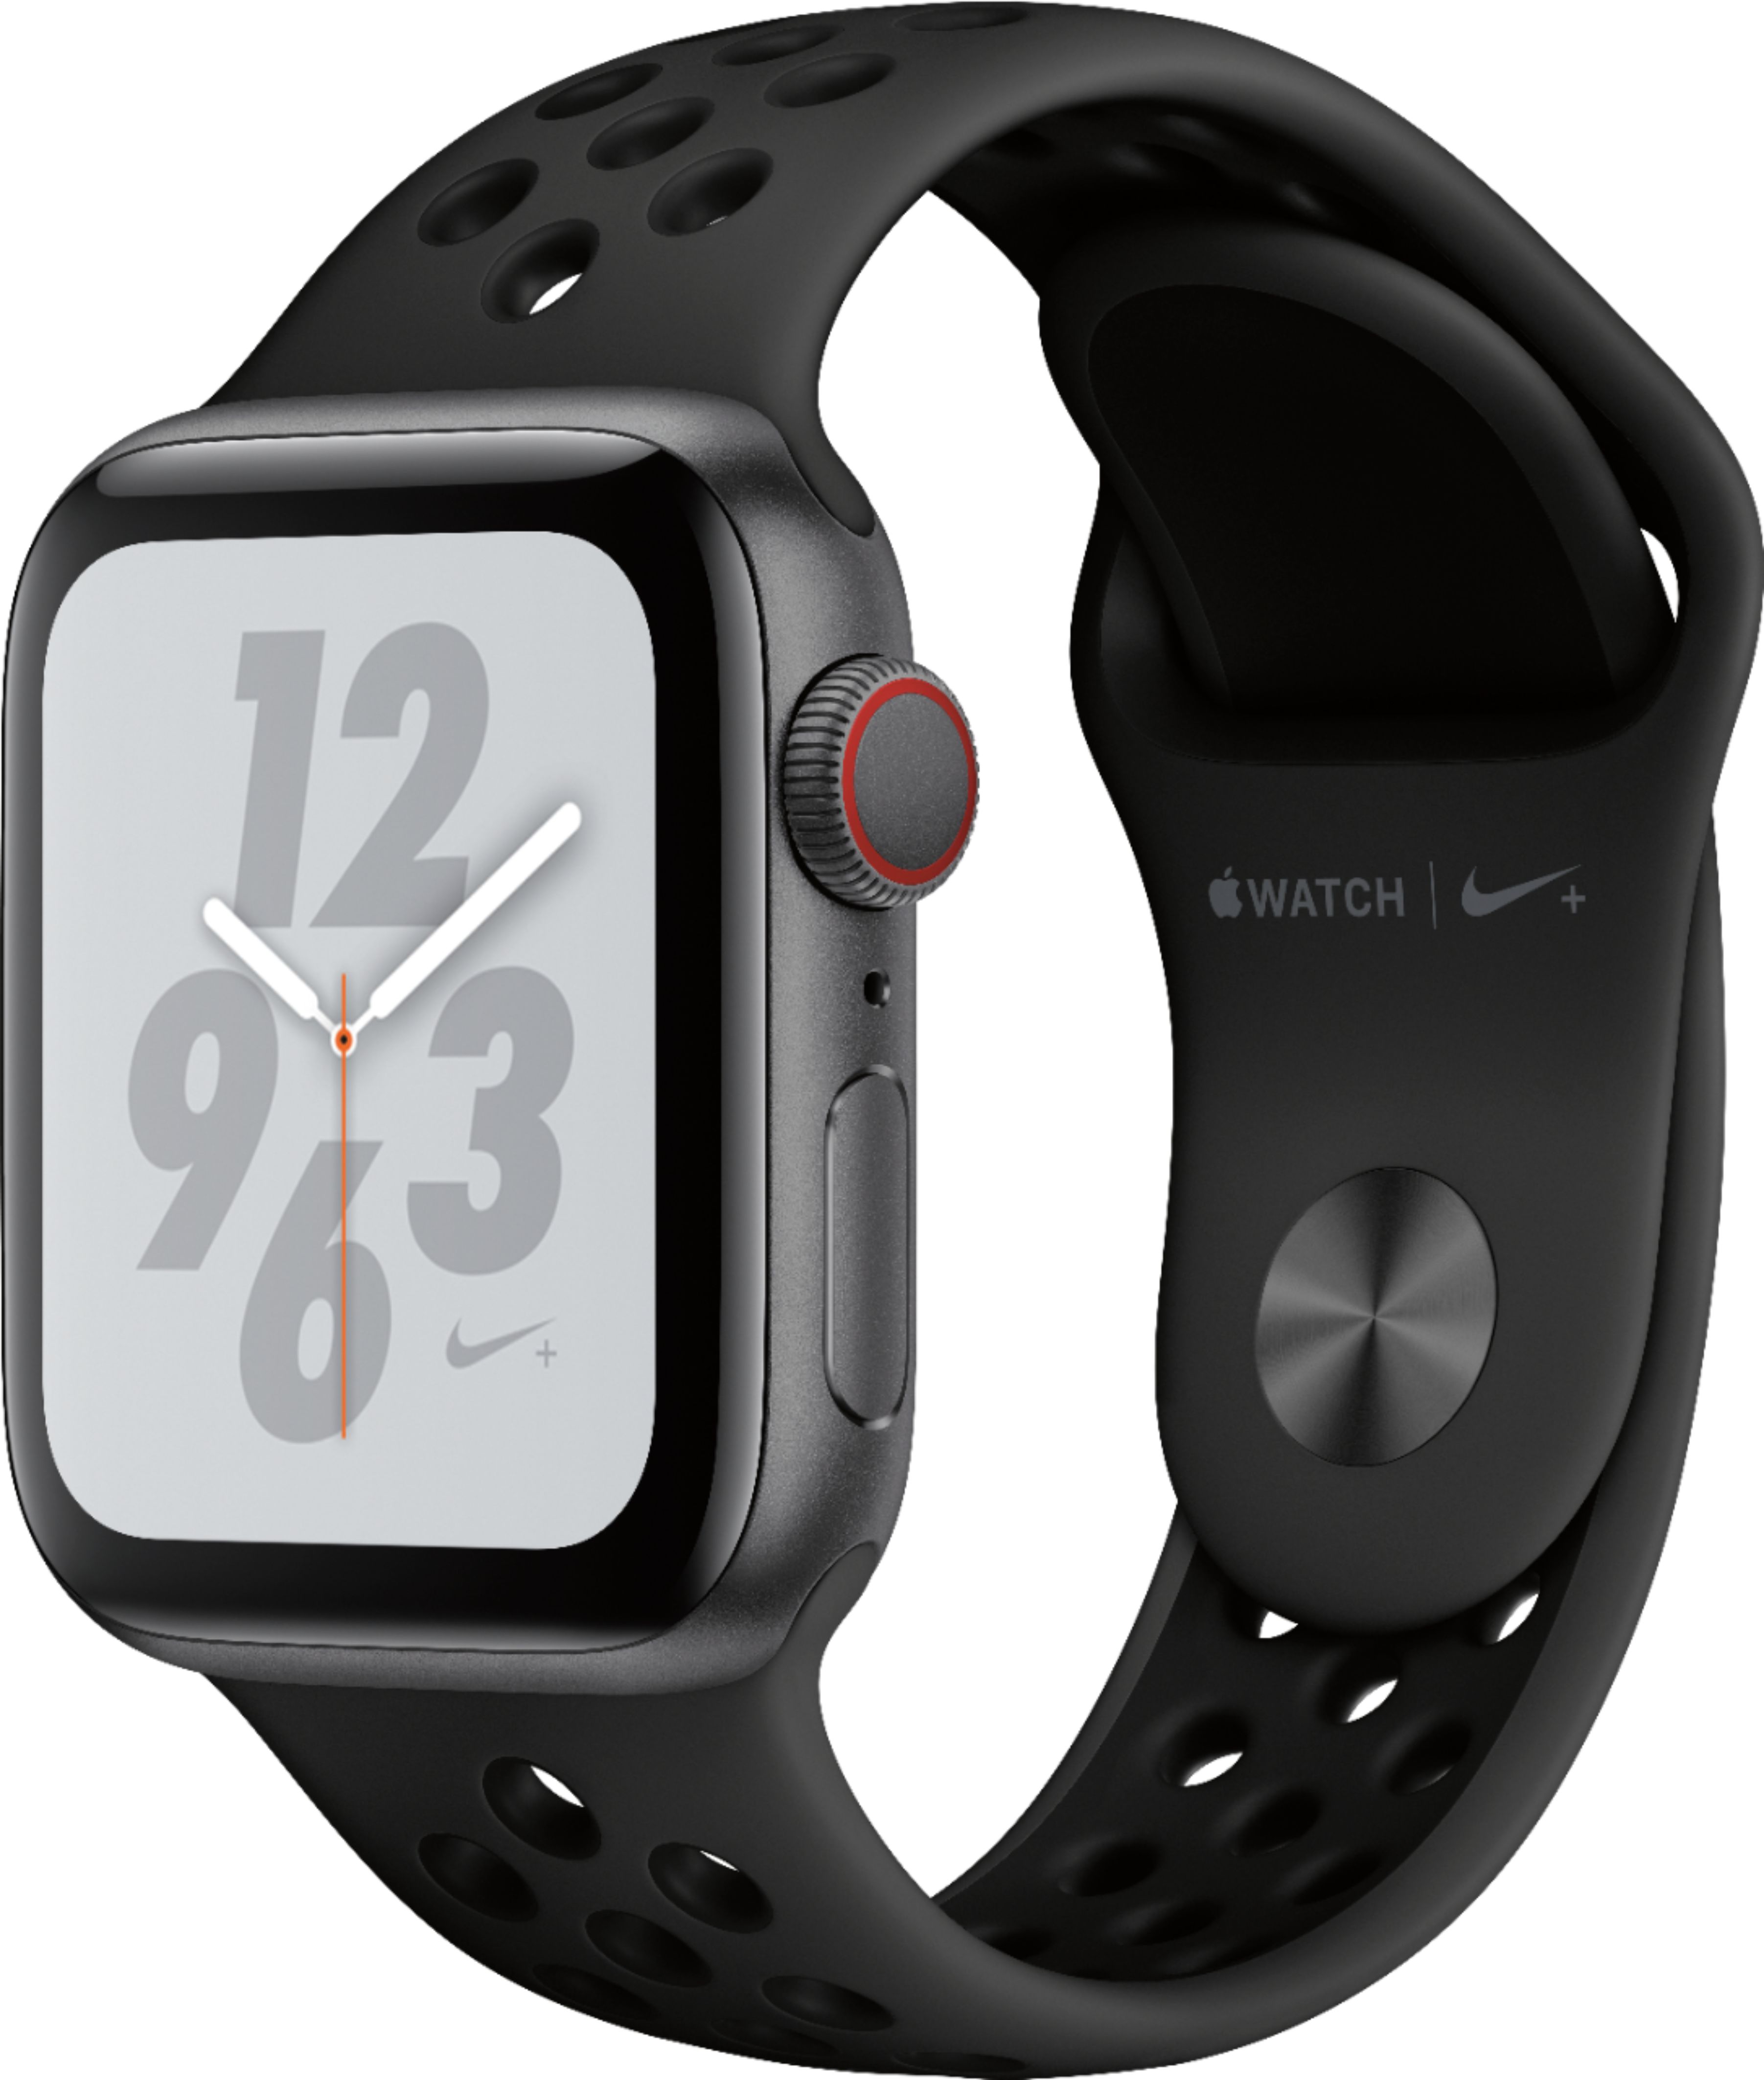 Apple Watch Nike - Where to Buy it at the Best Price in USA?